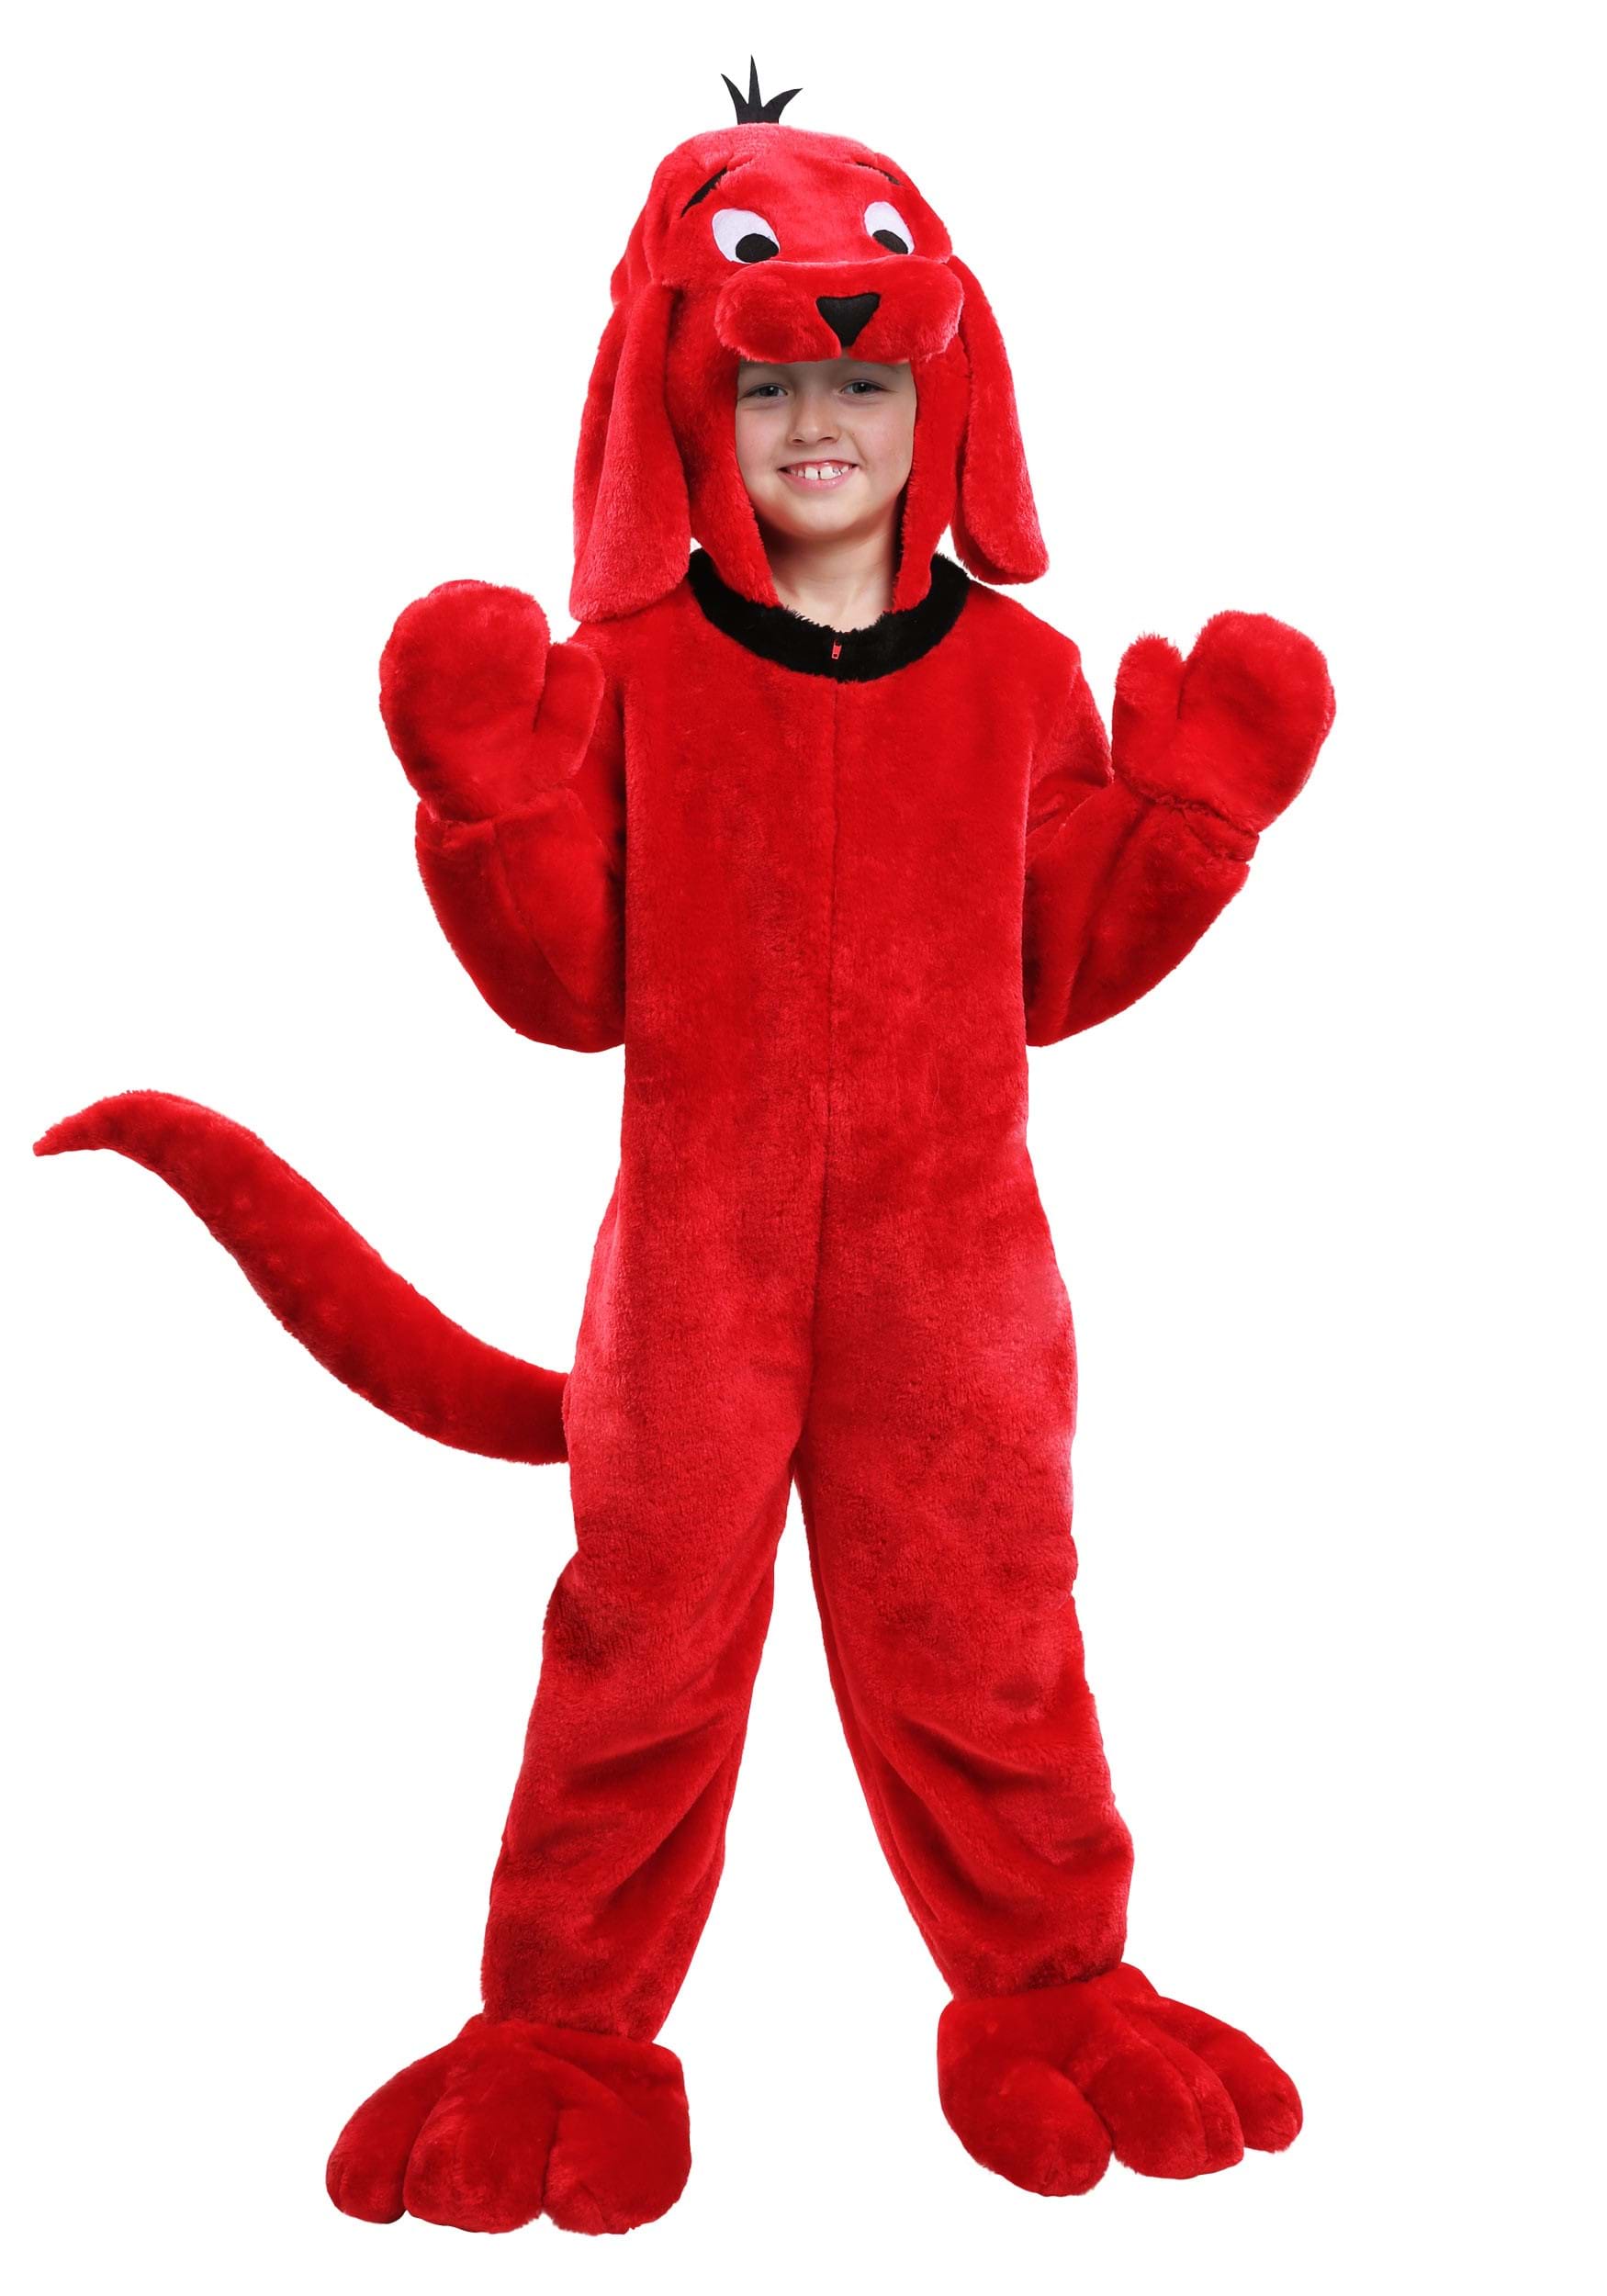 Clifford the Big Red Dog Costume for Children